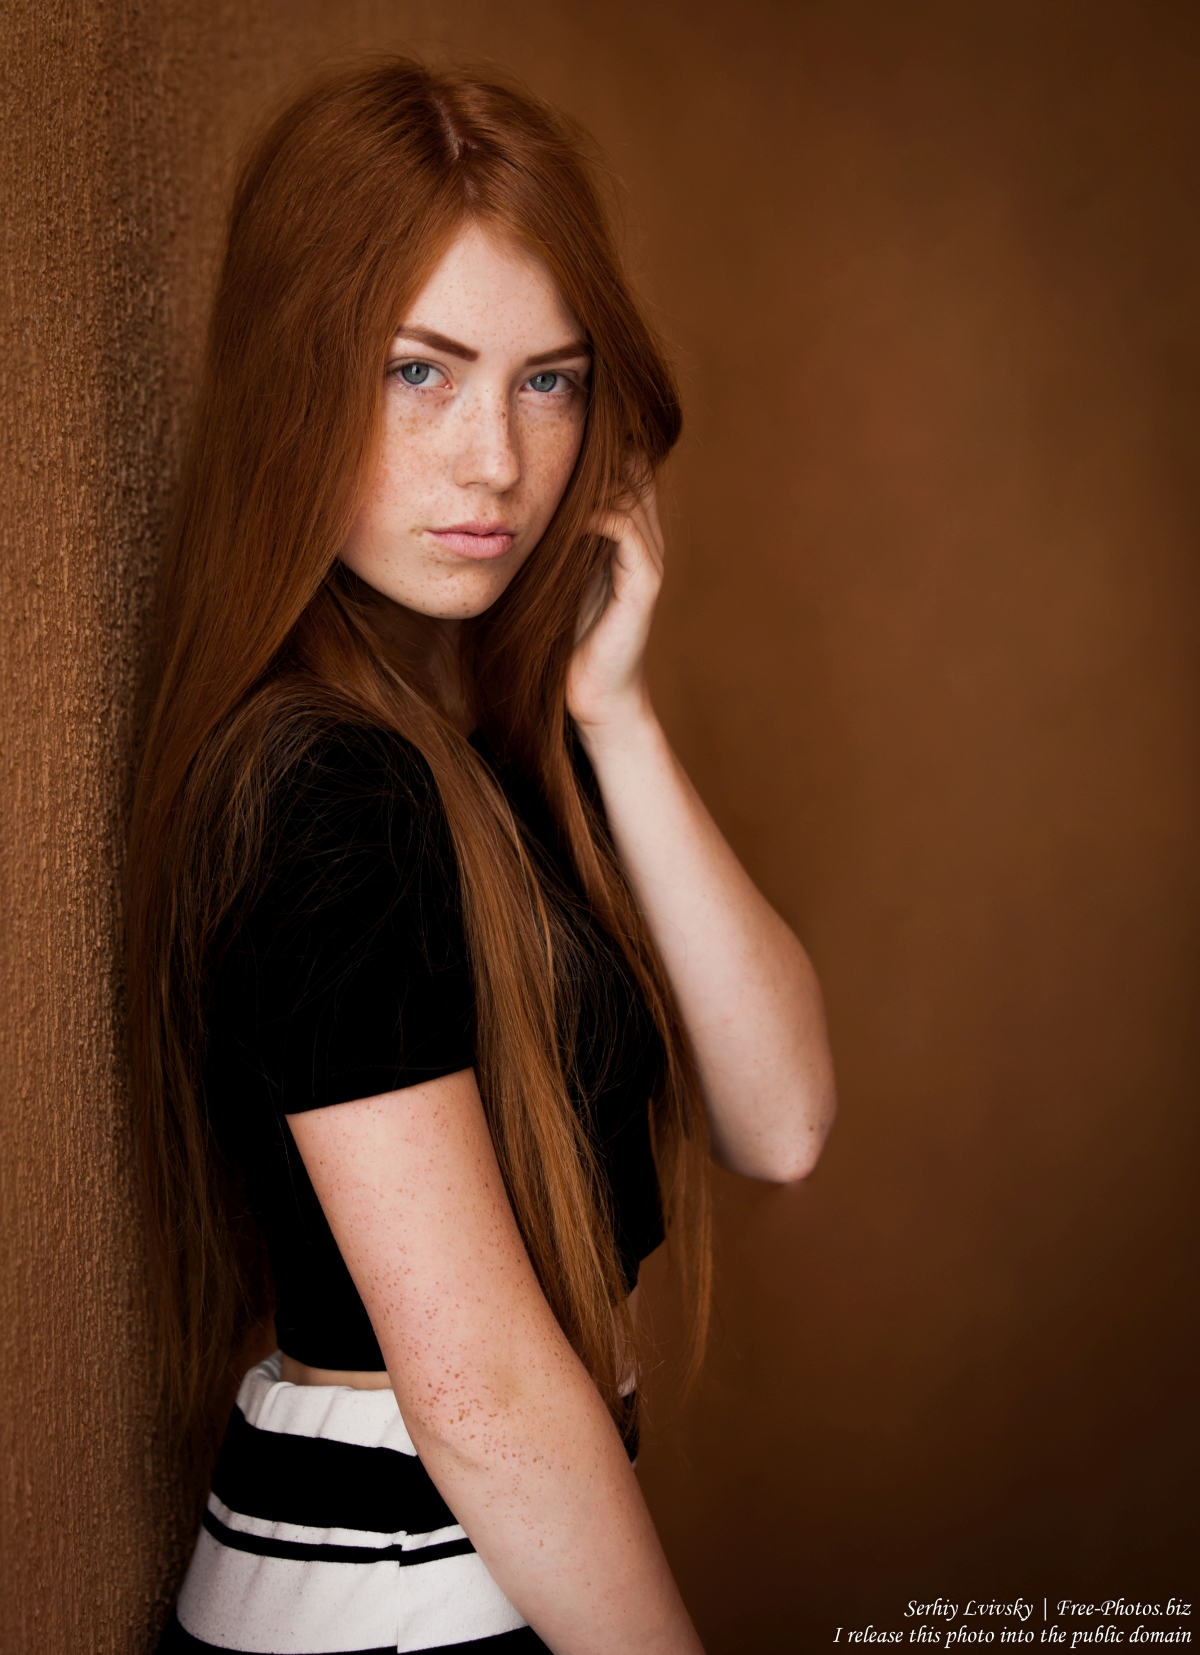 a_15-year-old_red-haired_catholic_girl_photographed_by_serhiy_lvivsky_in_august_2015_18